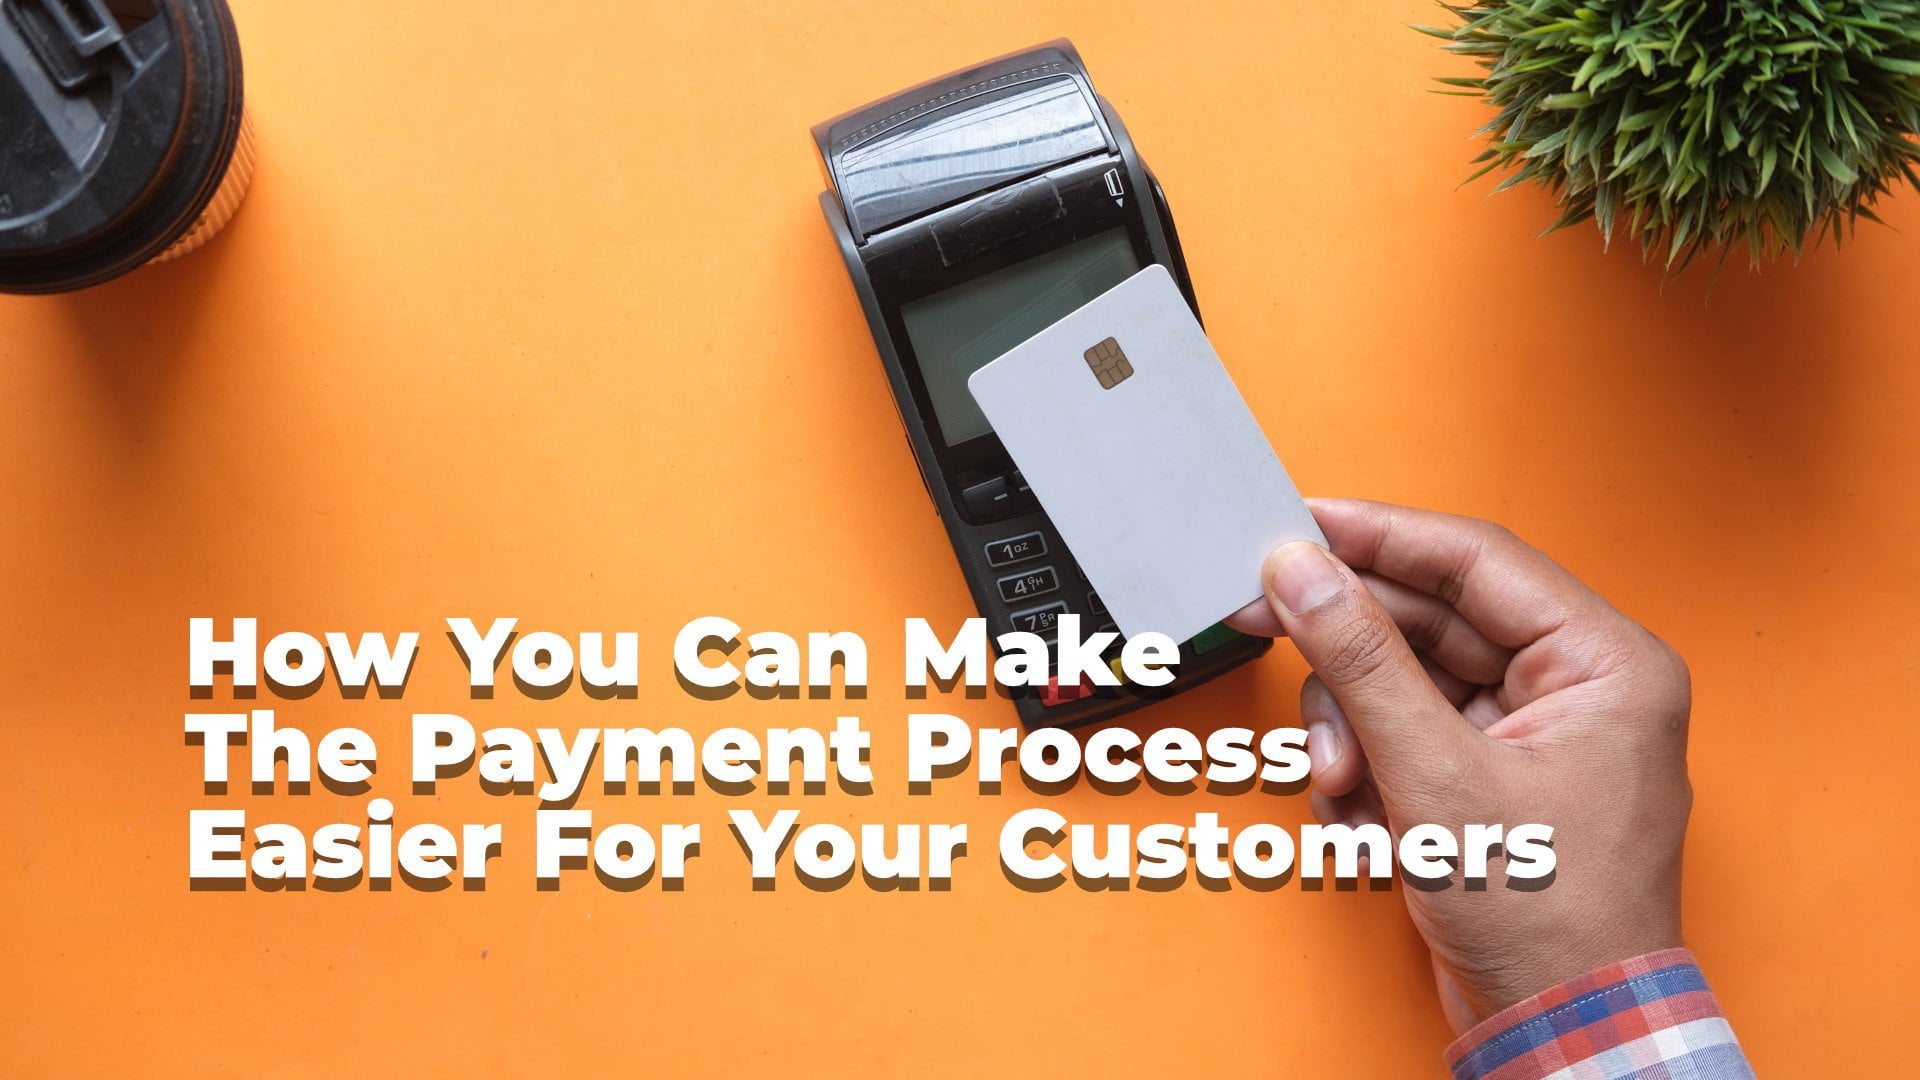 How You Can Make The Payment Process Easier For Your Customers